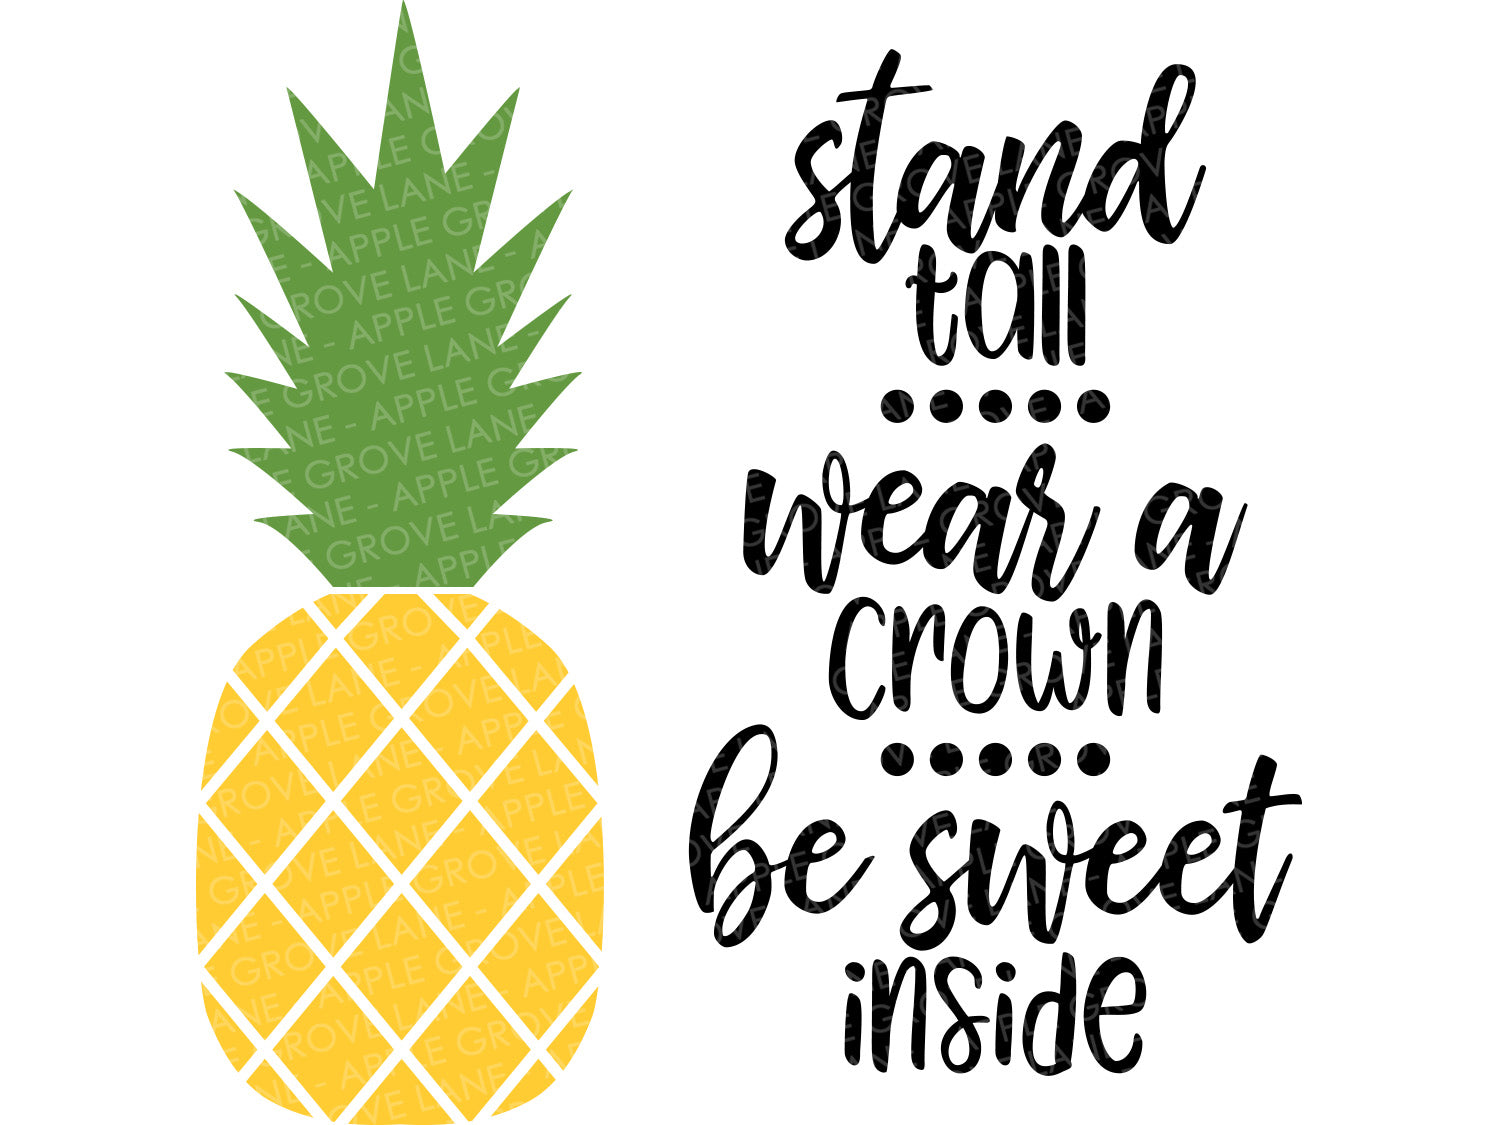 Pineapple Svg - Stand Tall Svg - Stand Tall Pineapple Svg - Hawaiian Svg - Tropical Svg - Hawaii Svg - Summer Svg - Hawaii Pineapple Svg